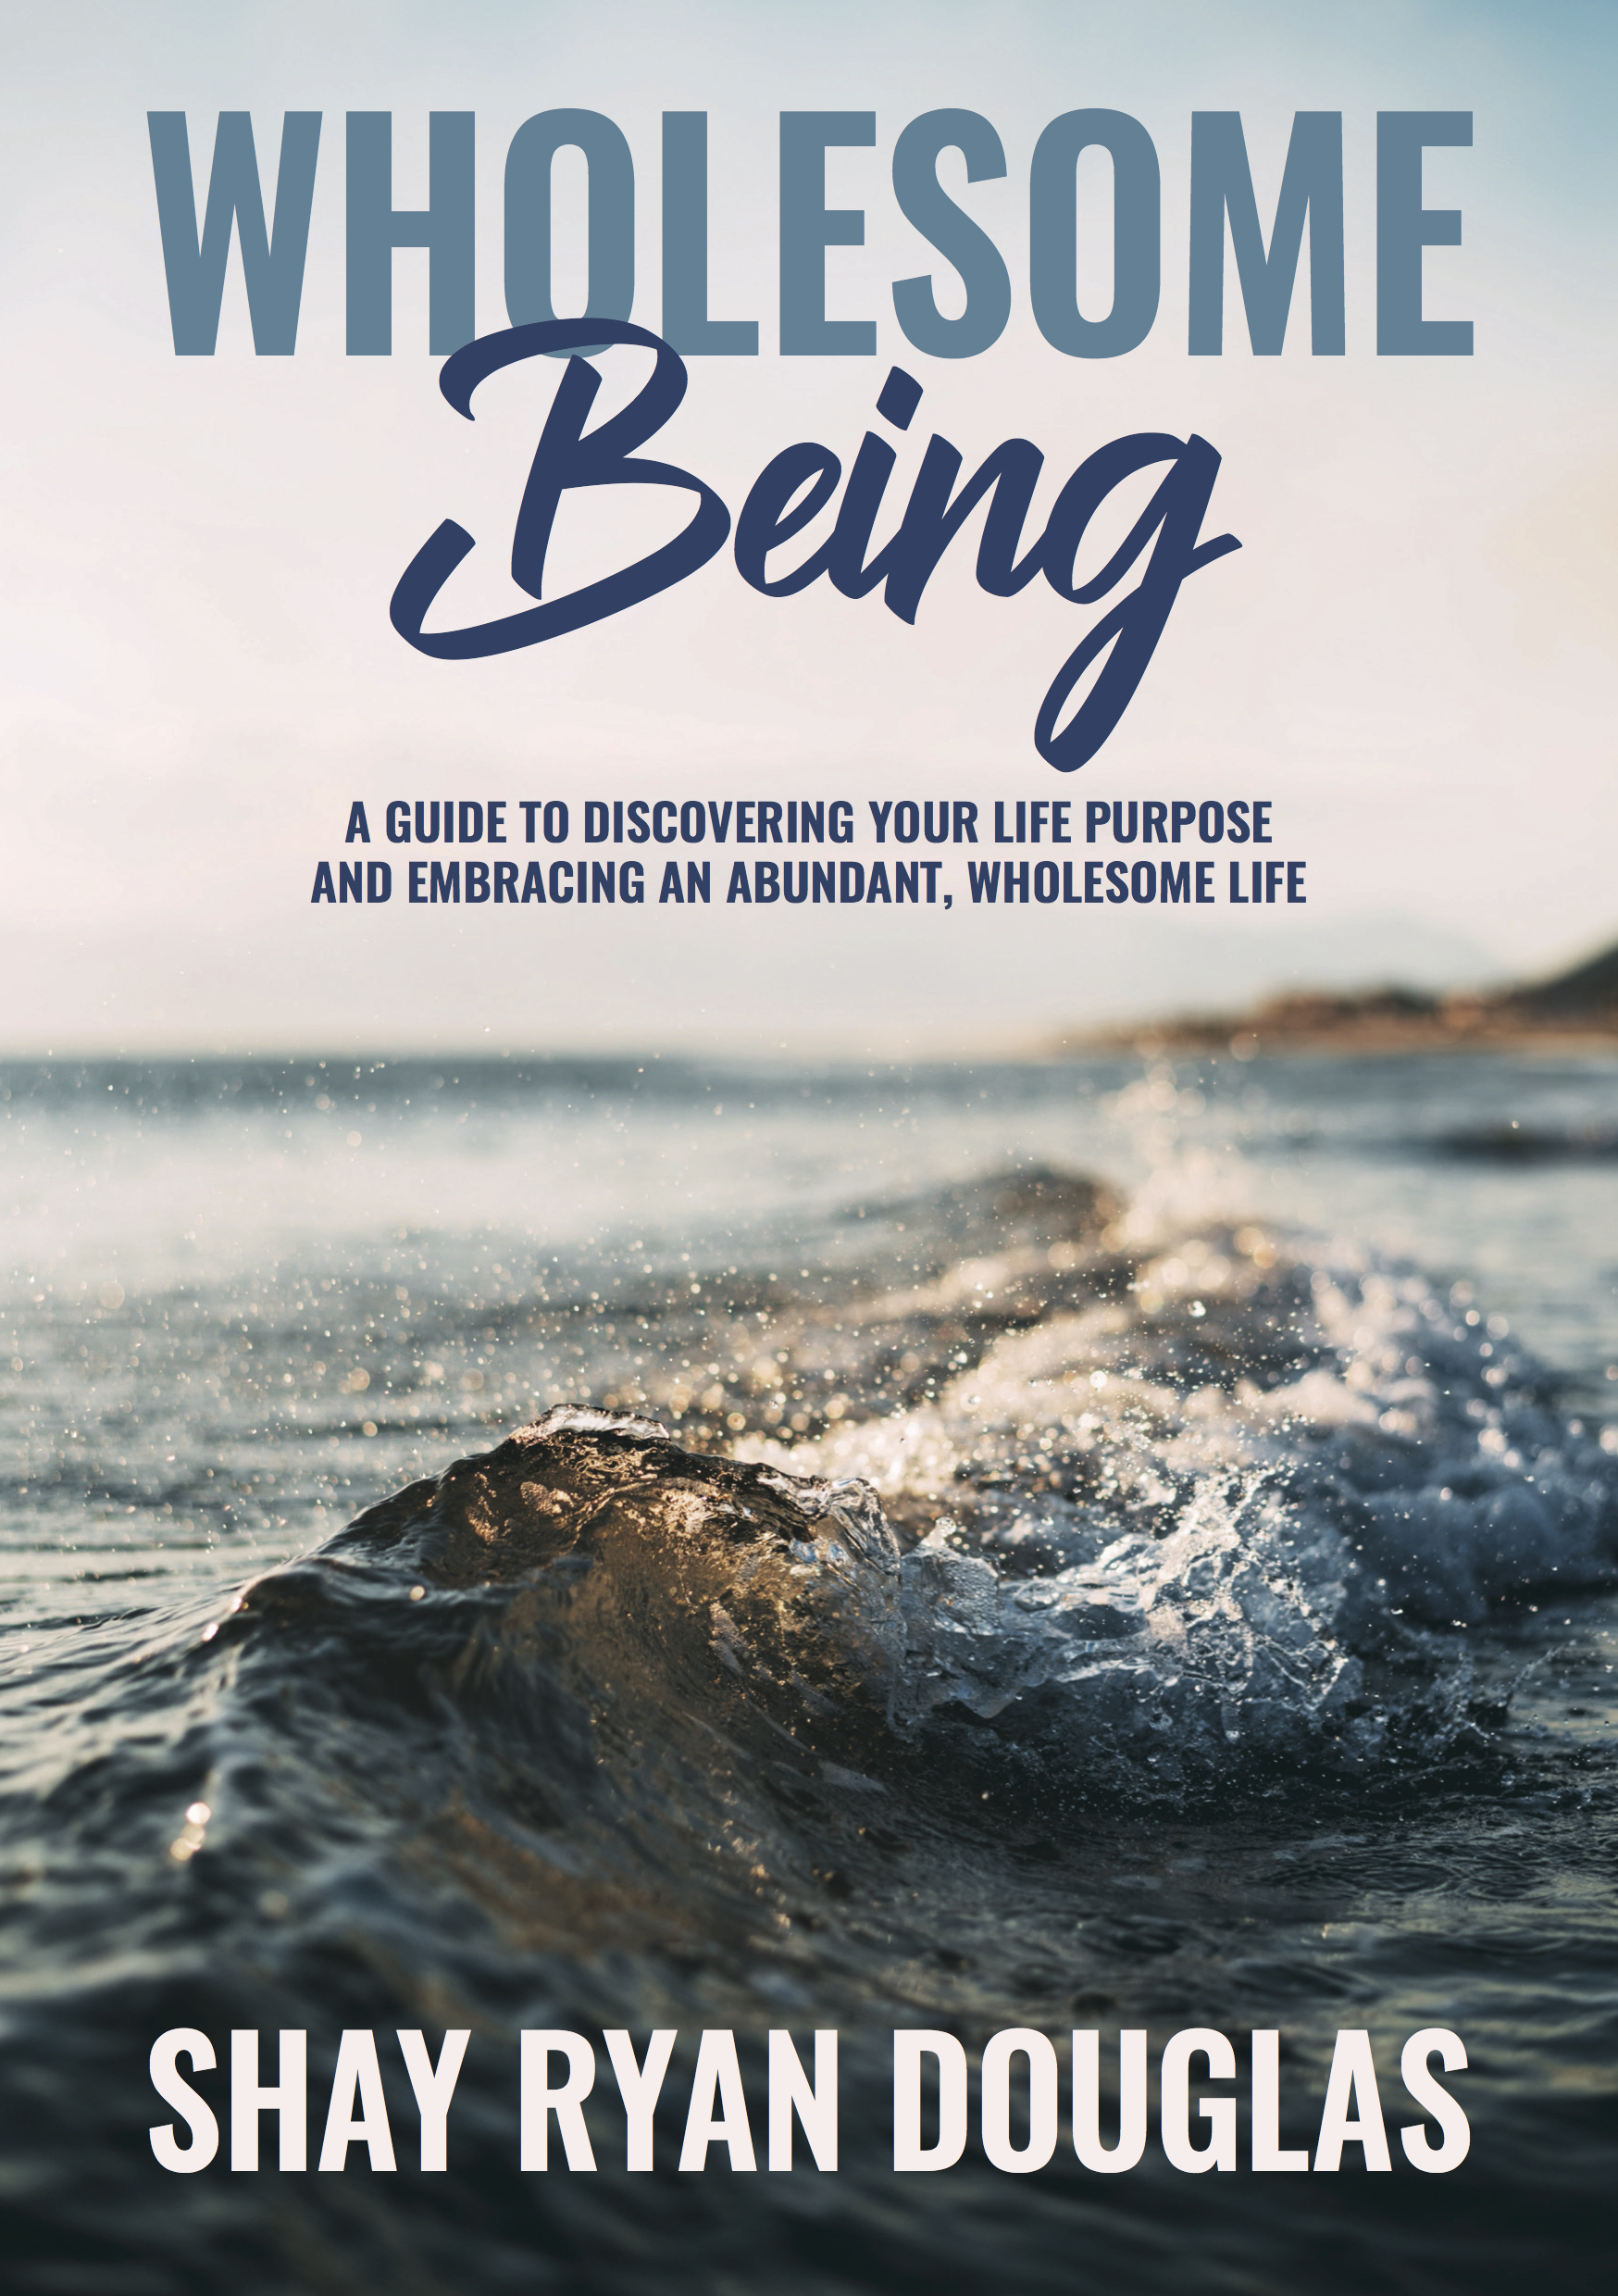 Wholesome-Being-ebook-author-shay-ryan-douglas